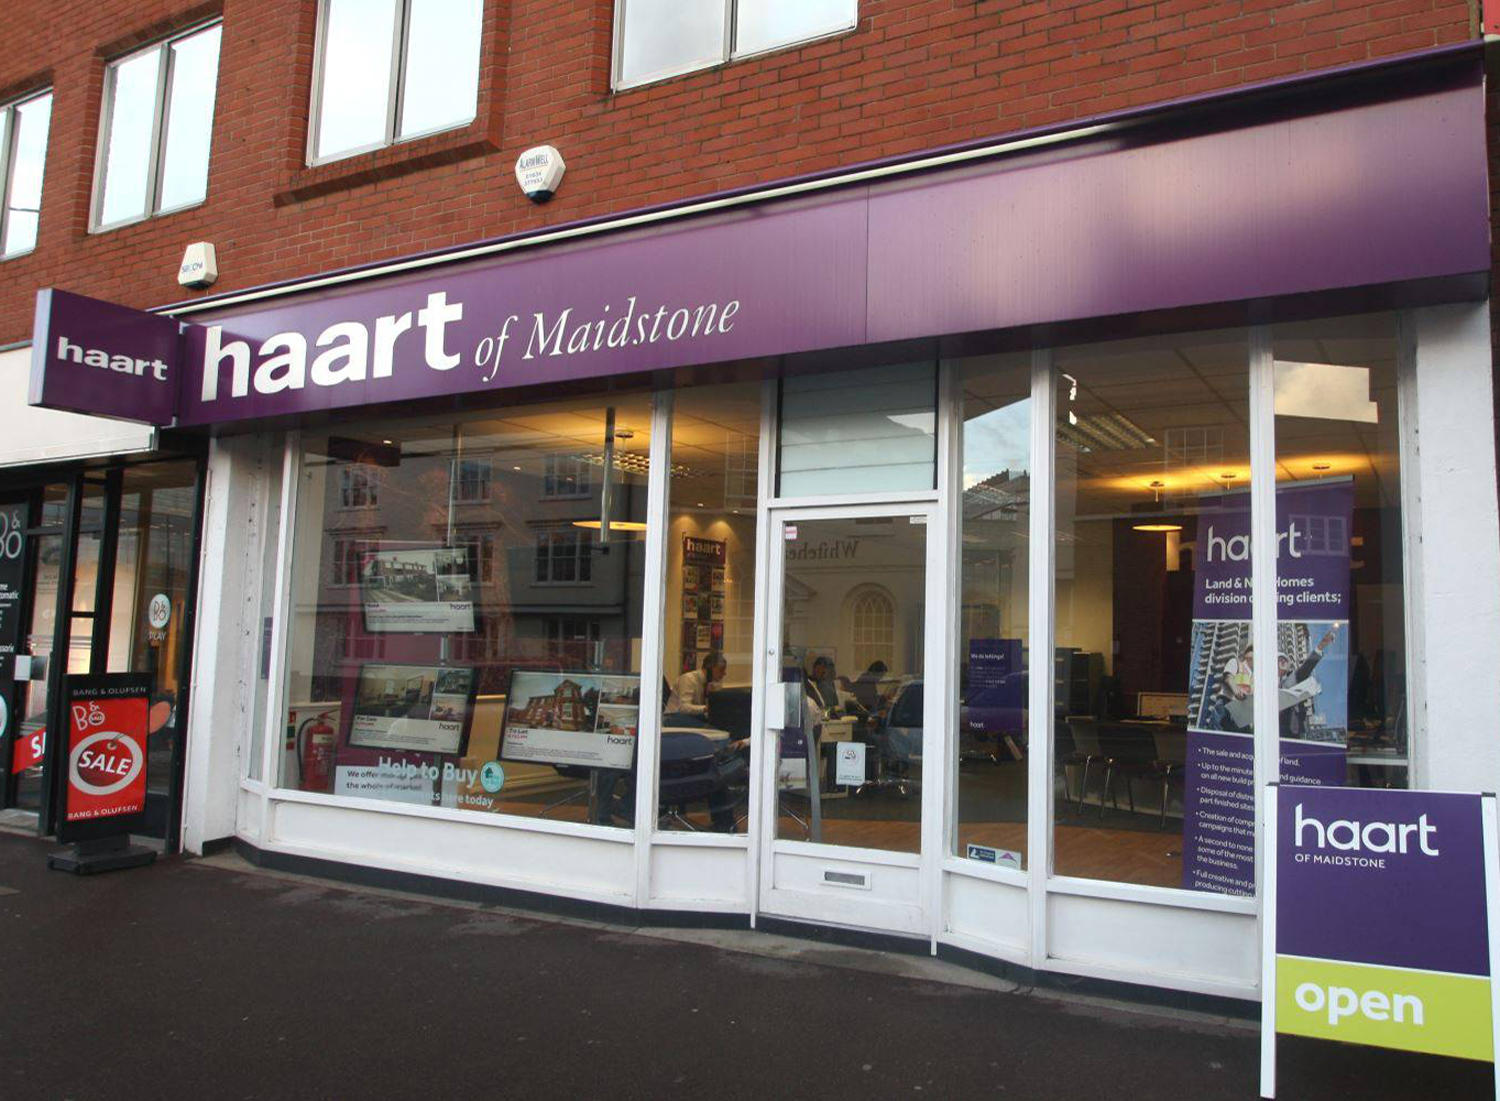 haart estate and lettings agents Maidstone Maidstone 01622 934216